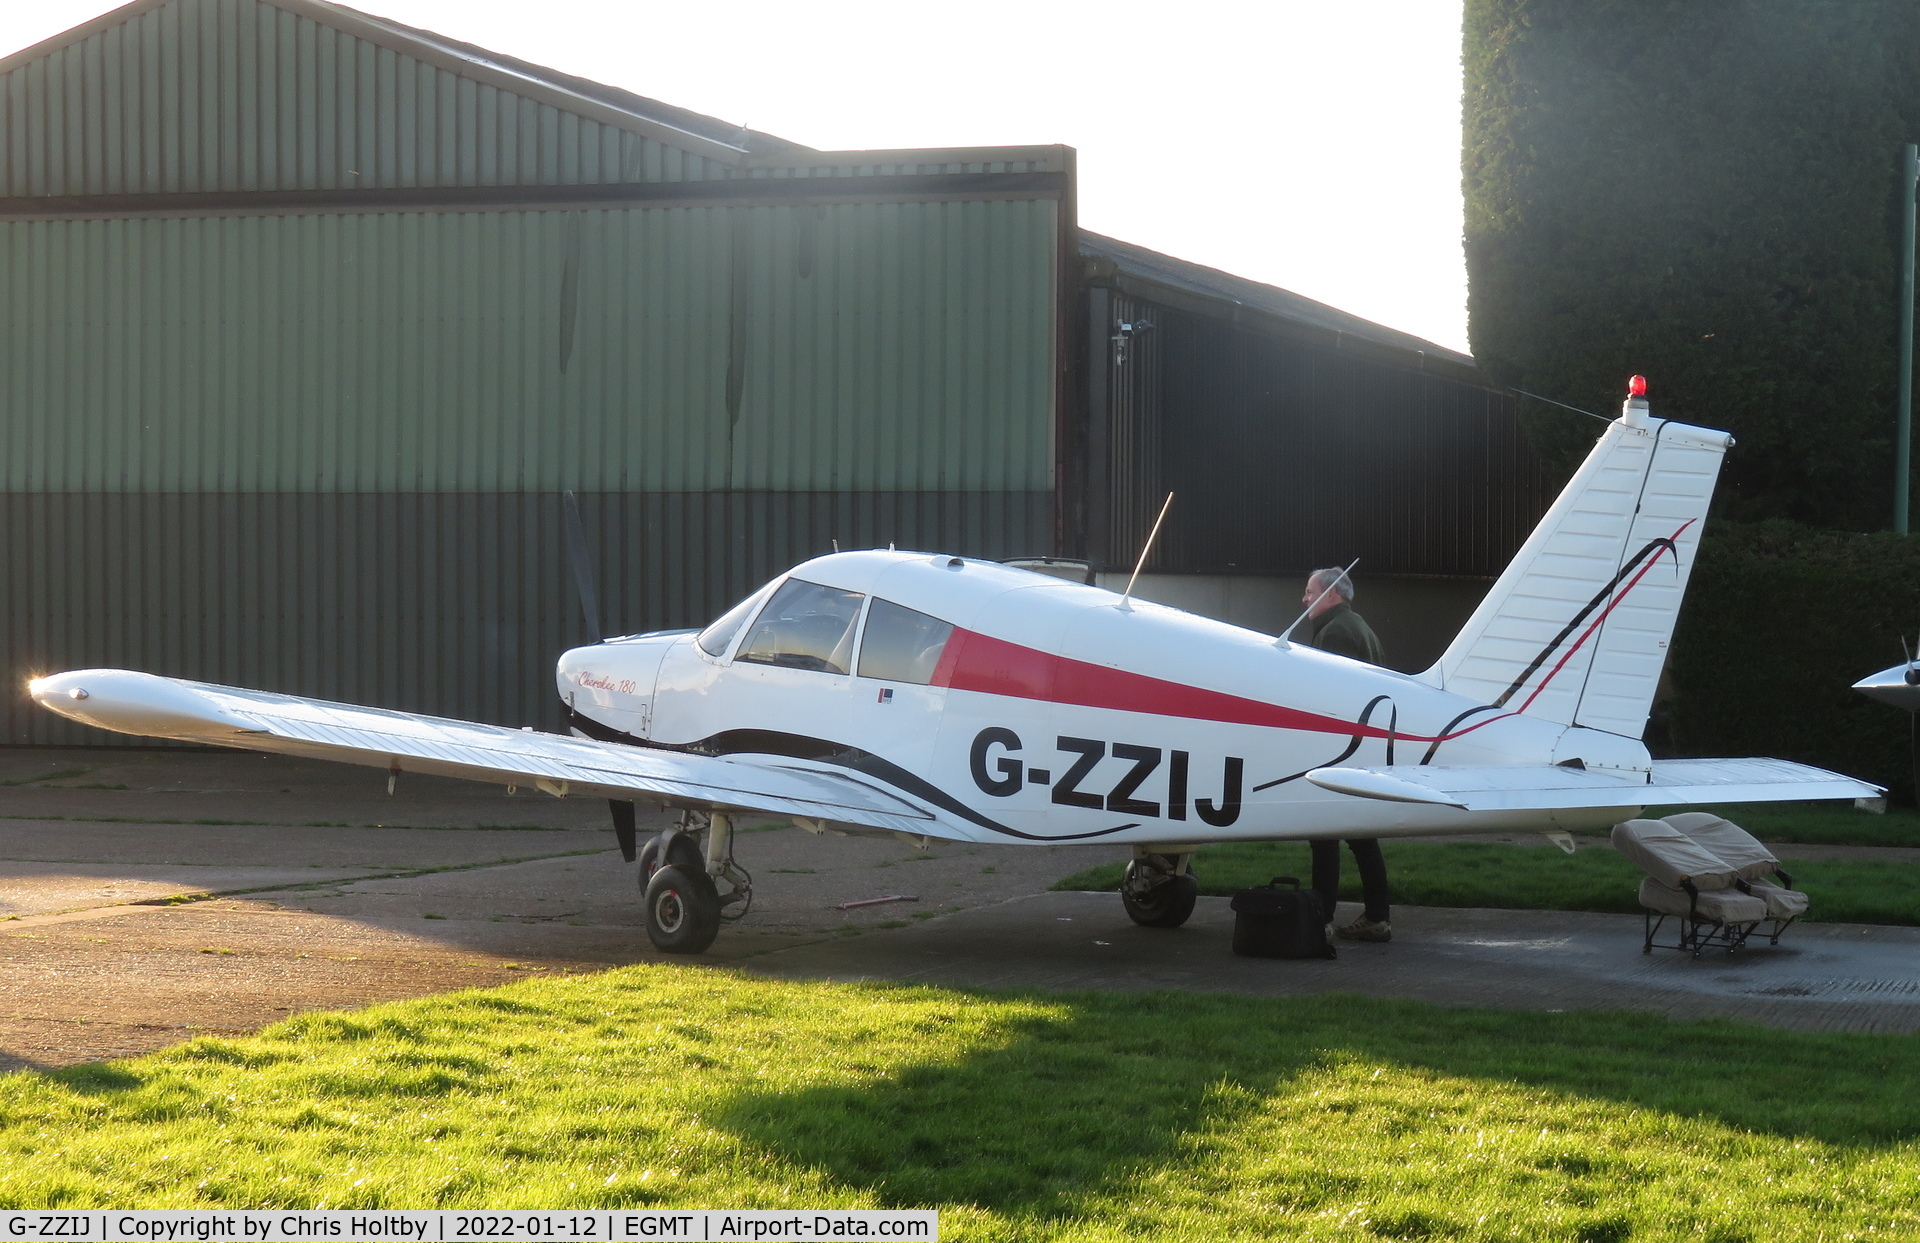 G-ZZIJ, 1966 Piper PA-28-180 Cherokee C/N 28-3639, Parked at Thurrock Airfield